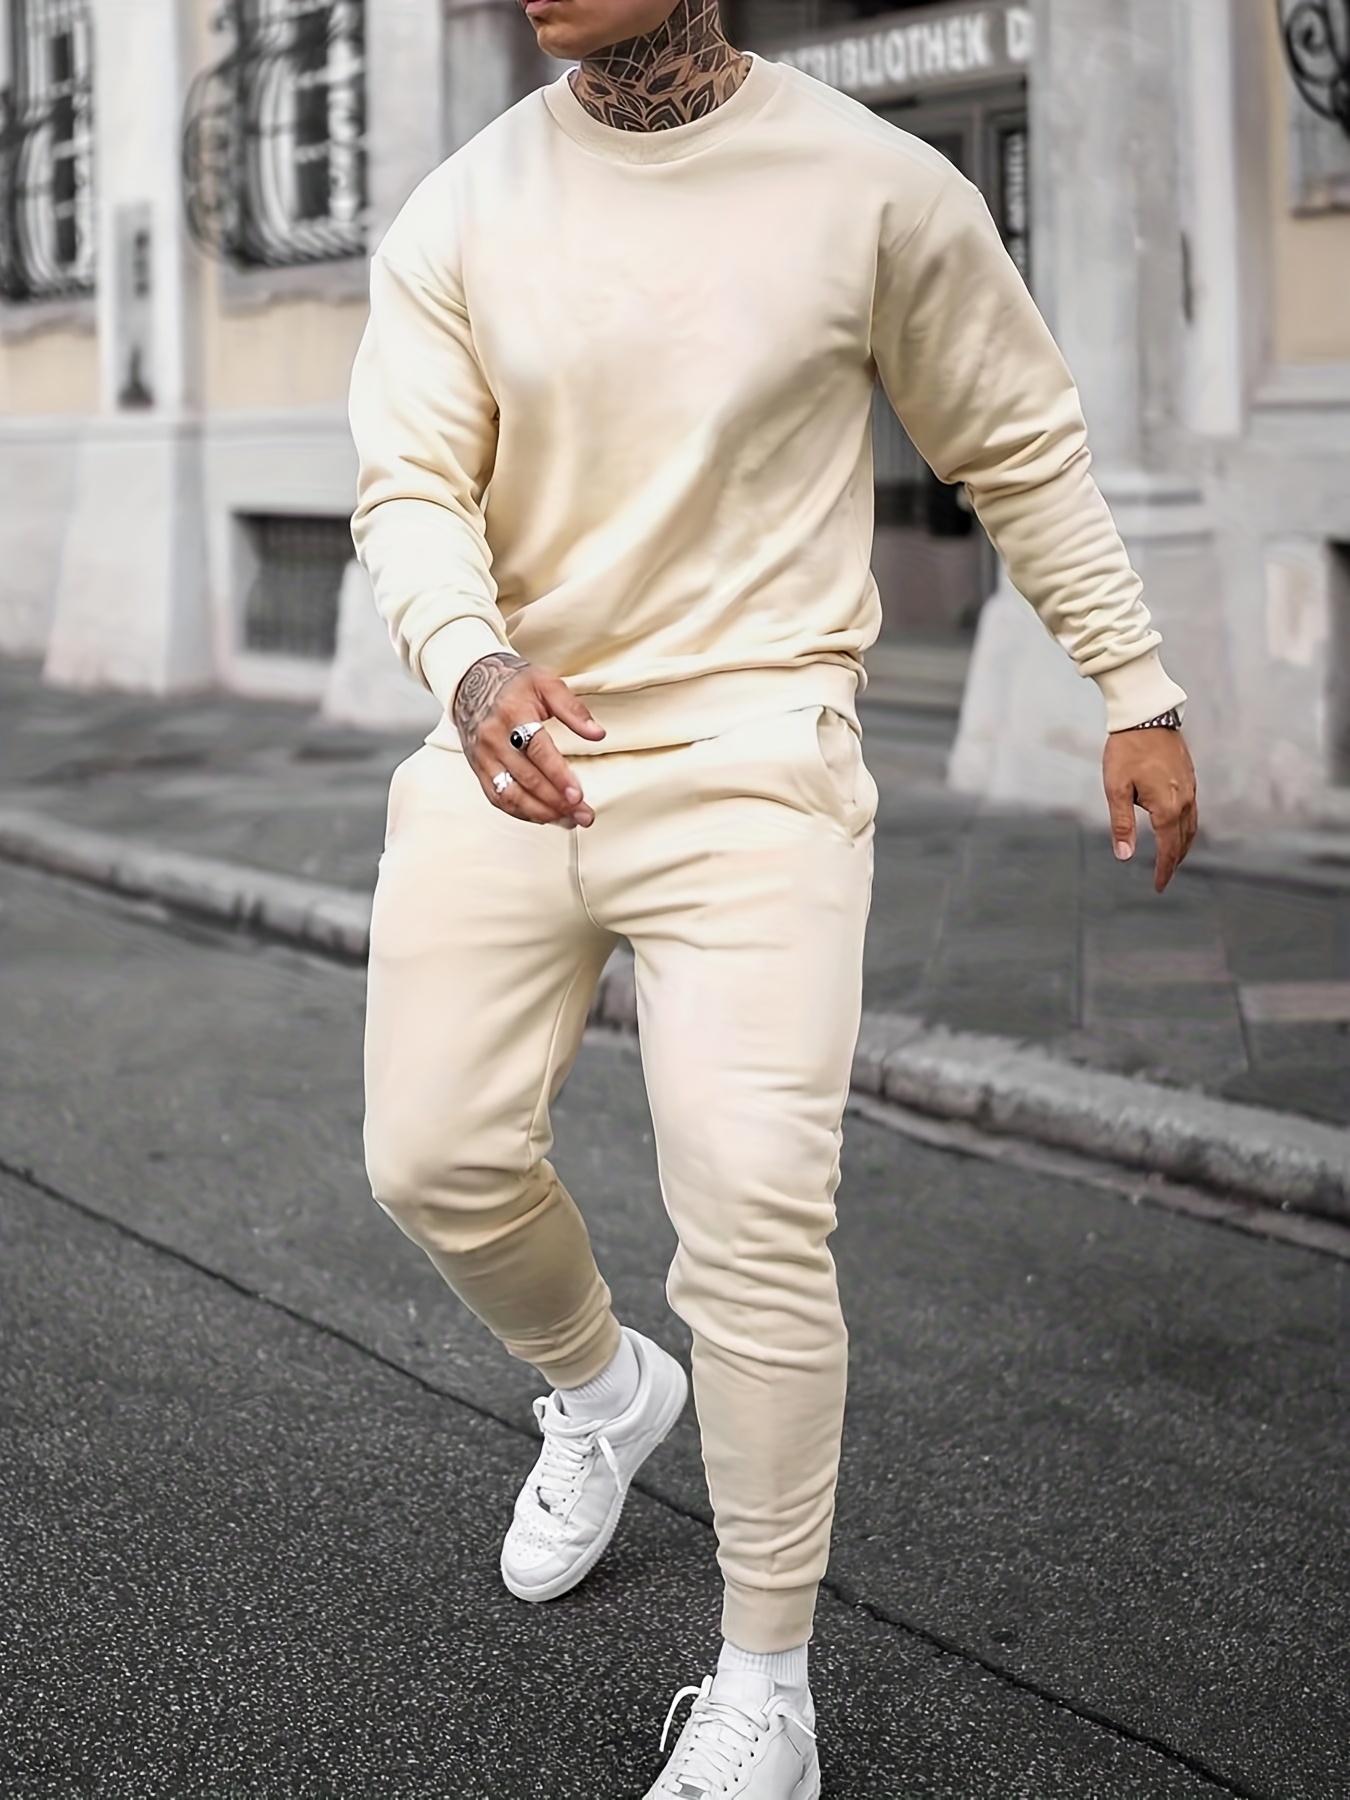 Beige Crew-neck Sweater with Sweatpants Outfits For Men (13 ideas